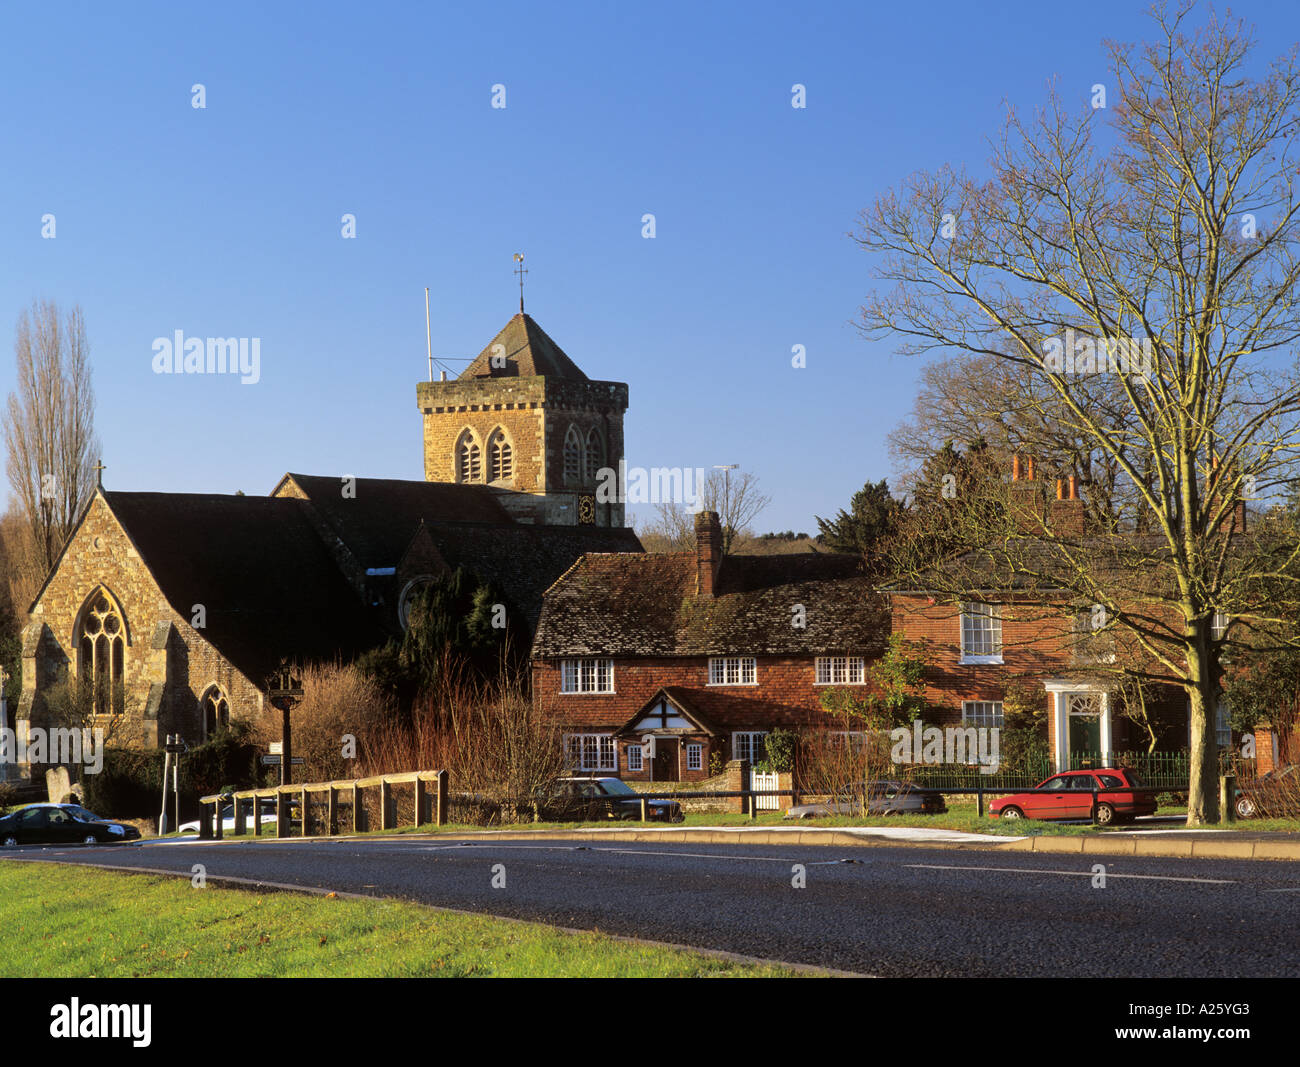 ST MARY'S CHURCH and COTTAGES Chiddingfold Surrey England UK Europe Stock Photo